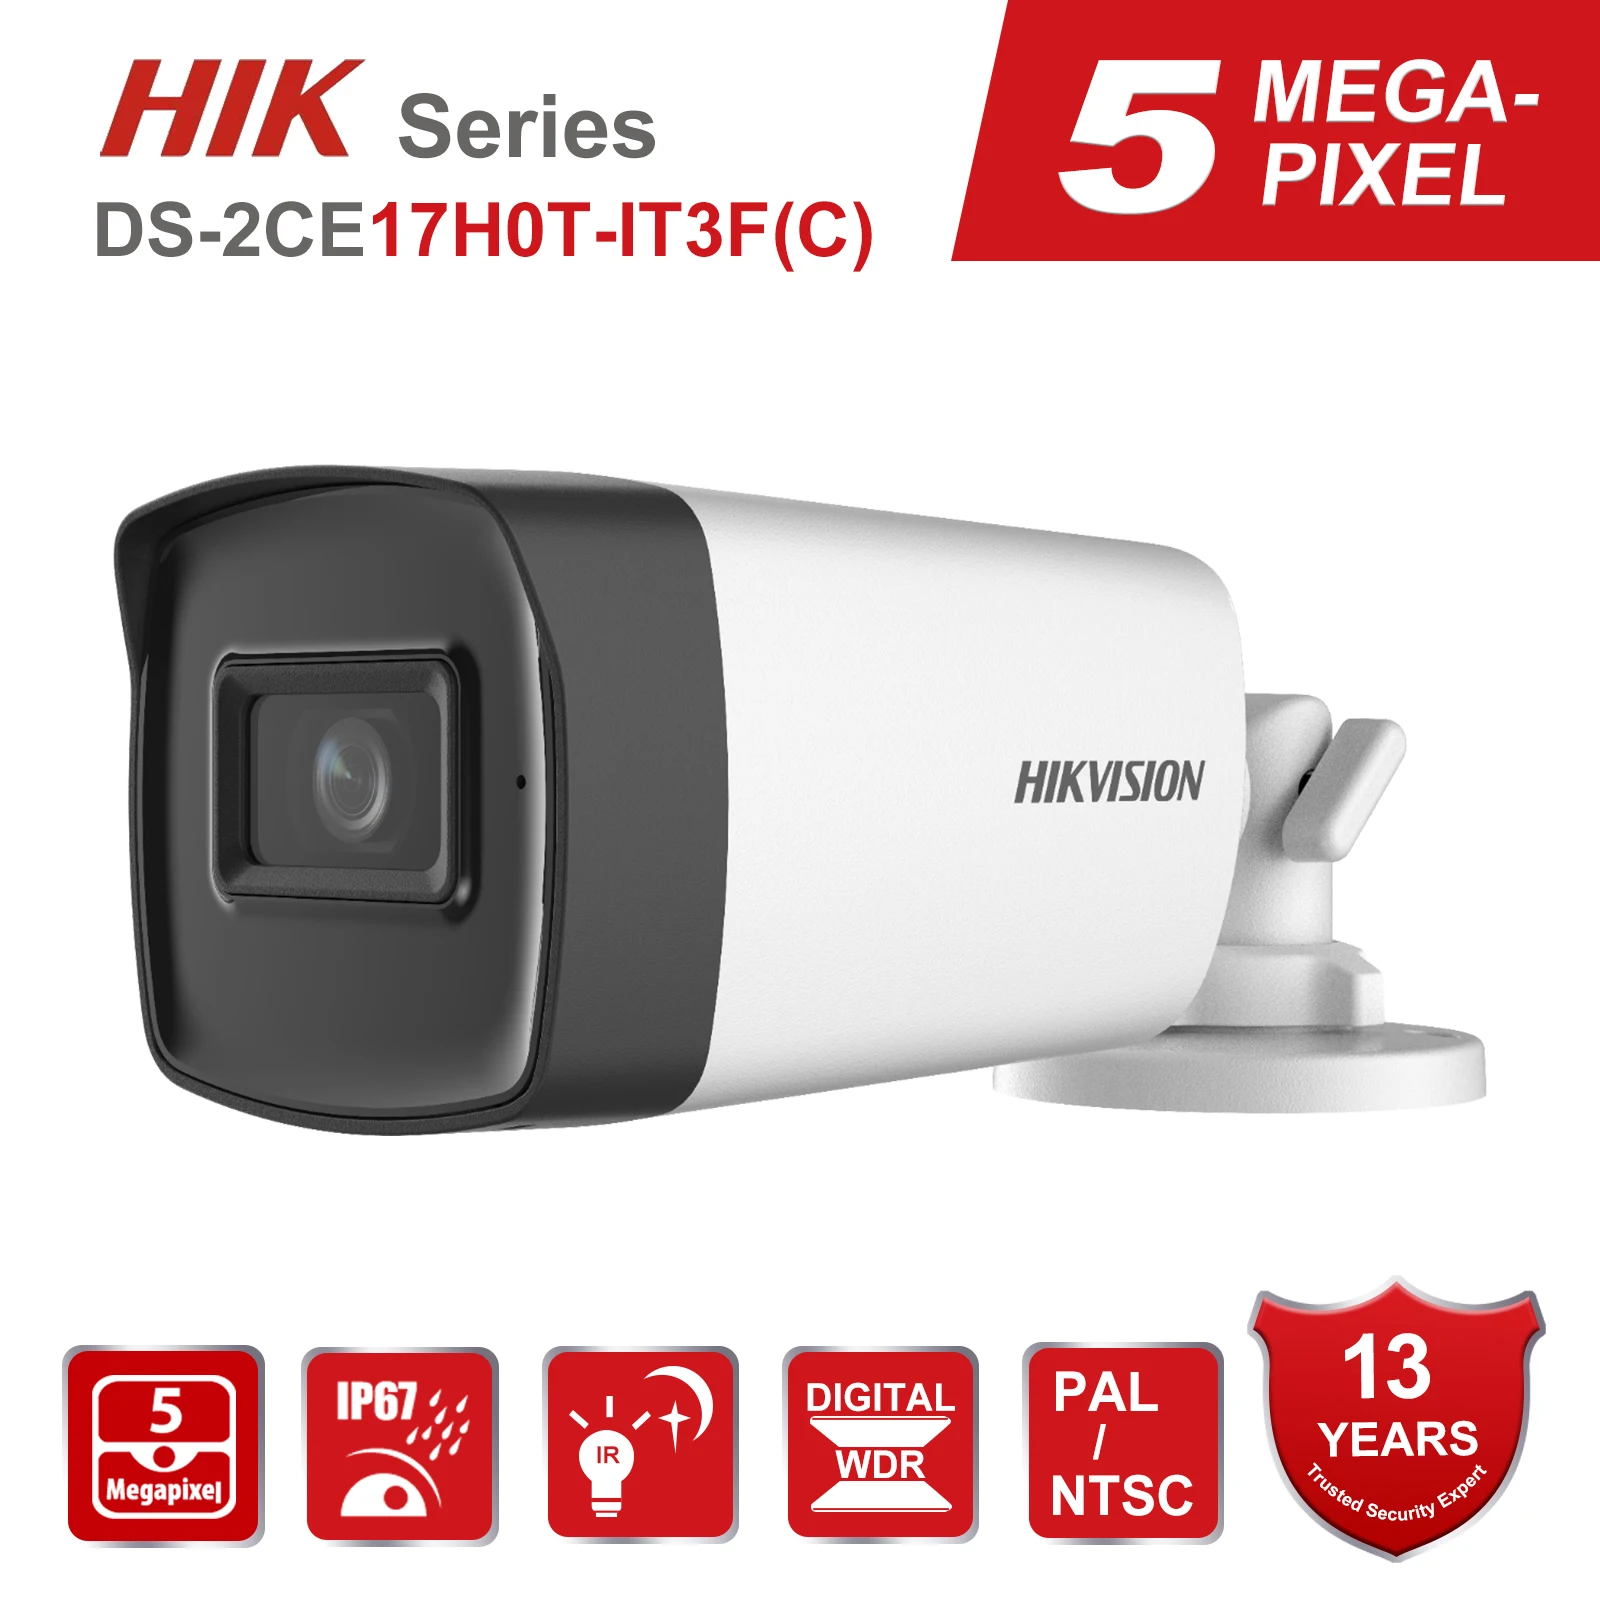 

Hikvision 5MP Analog Fixed Bullet Camera DS-2CE17H0T-IT3F(C) CCTV Surveillance Outdoor 2560*1944 Resolution IP67 Waterproof